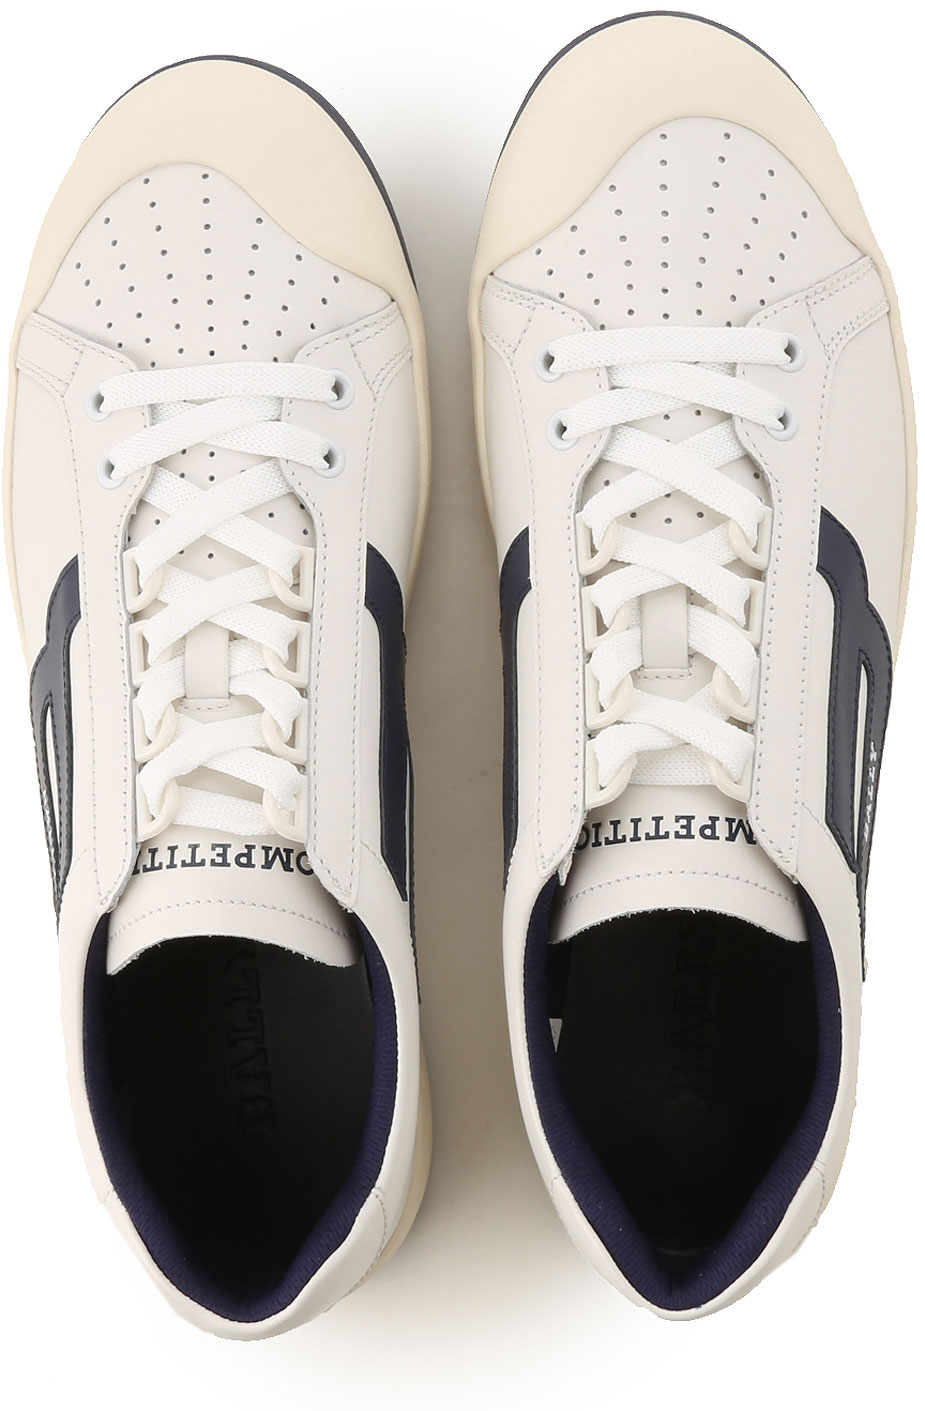 Mens Shoes Bally, Style code: 6221259-143-